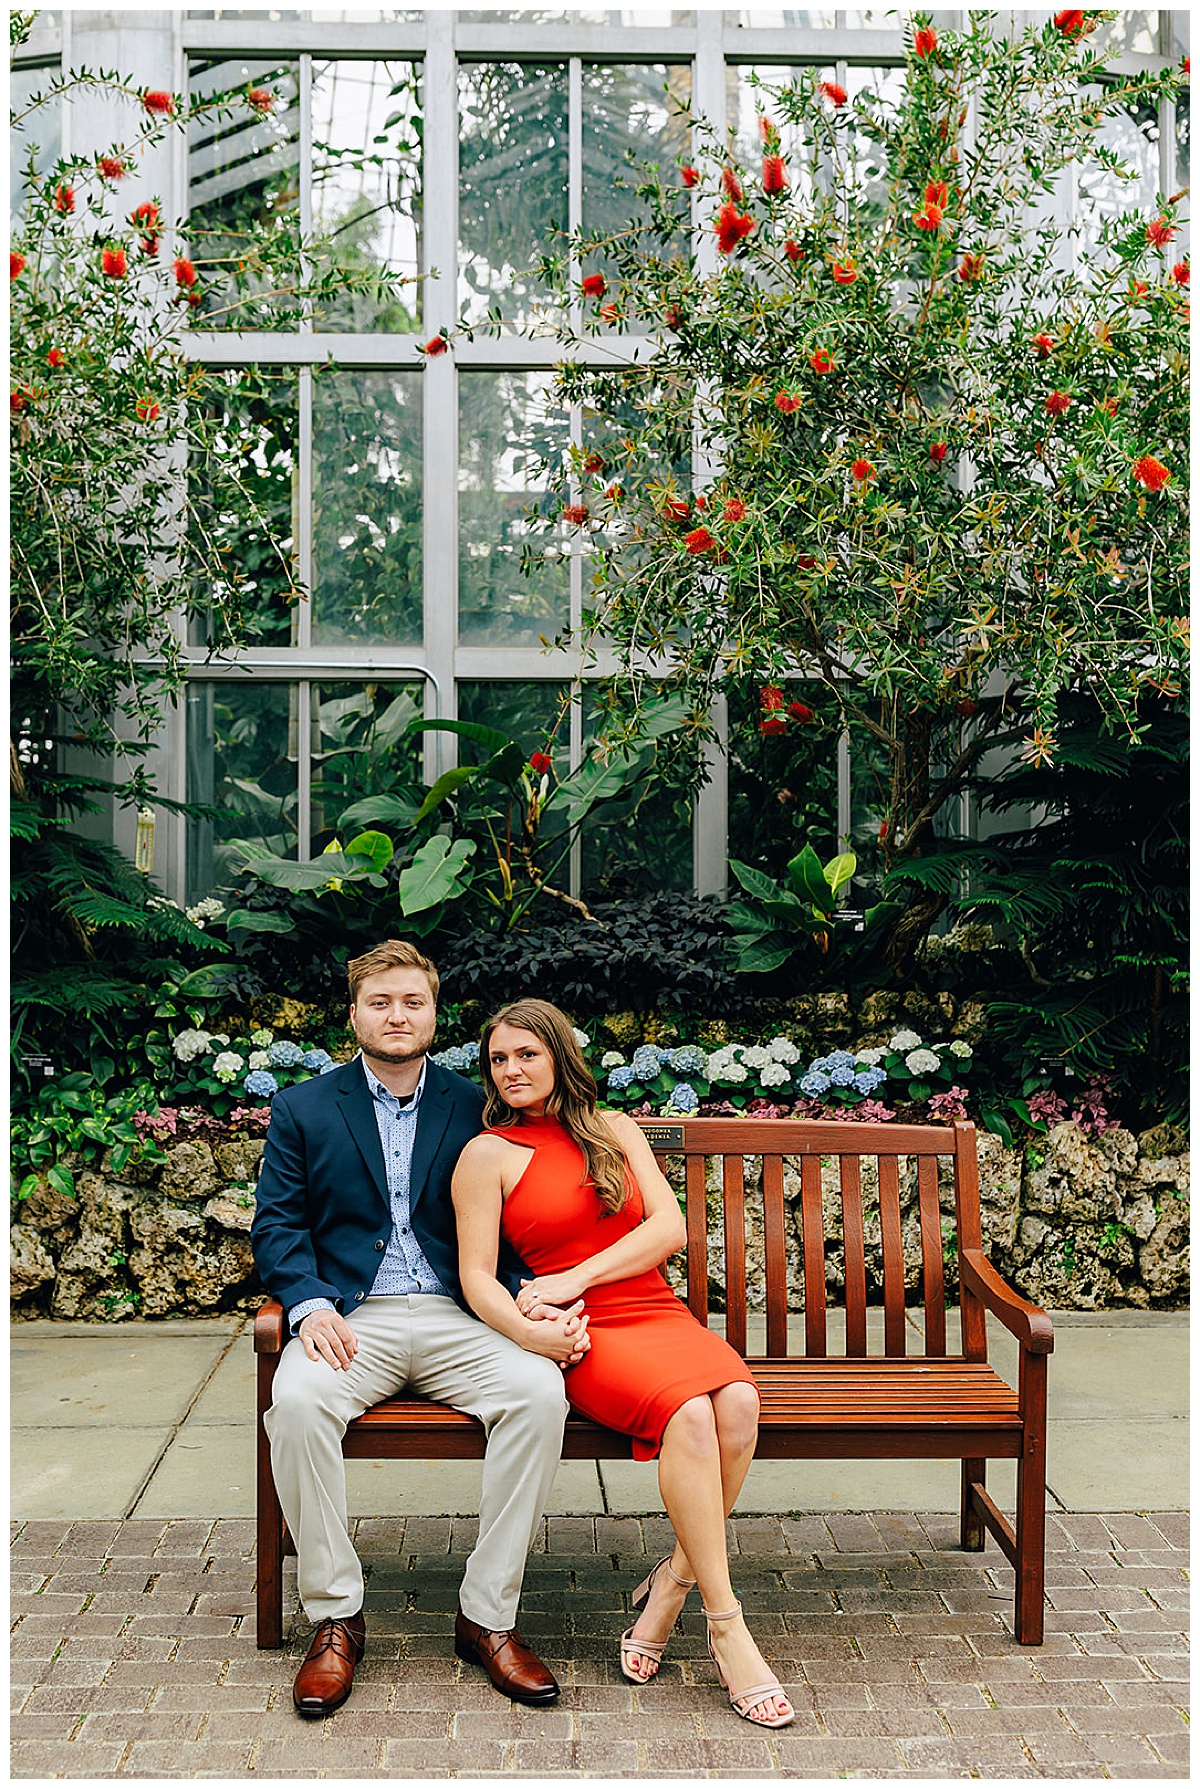 Fiances sit together on bench for Detroit Wedding Photographer